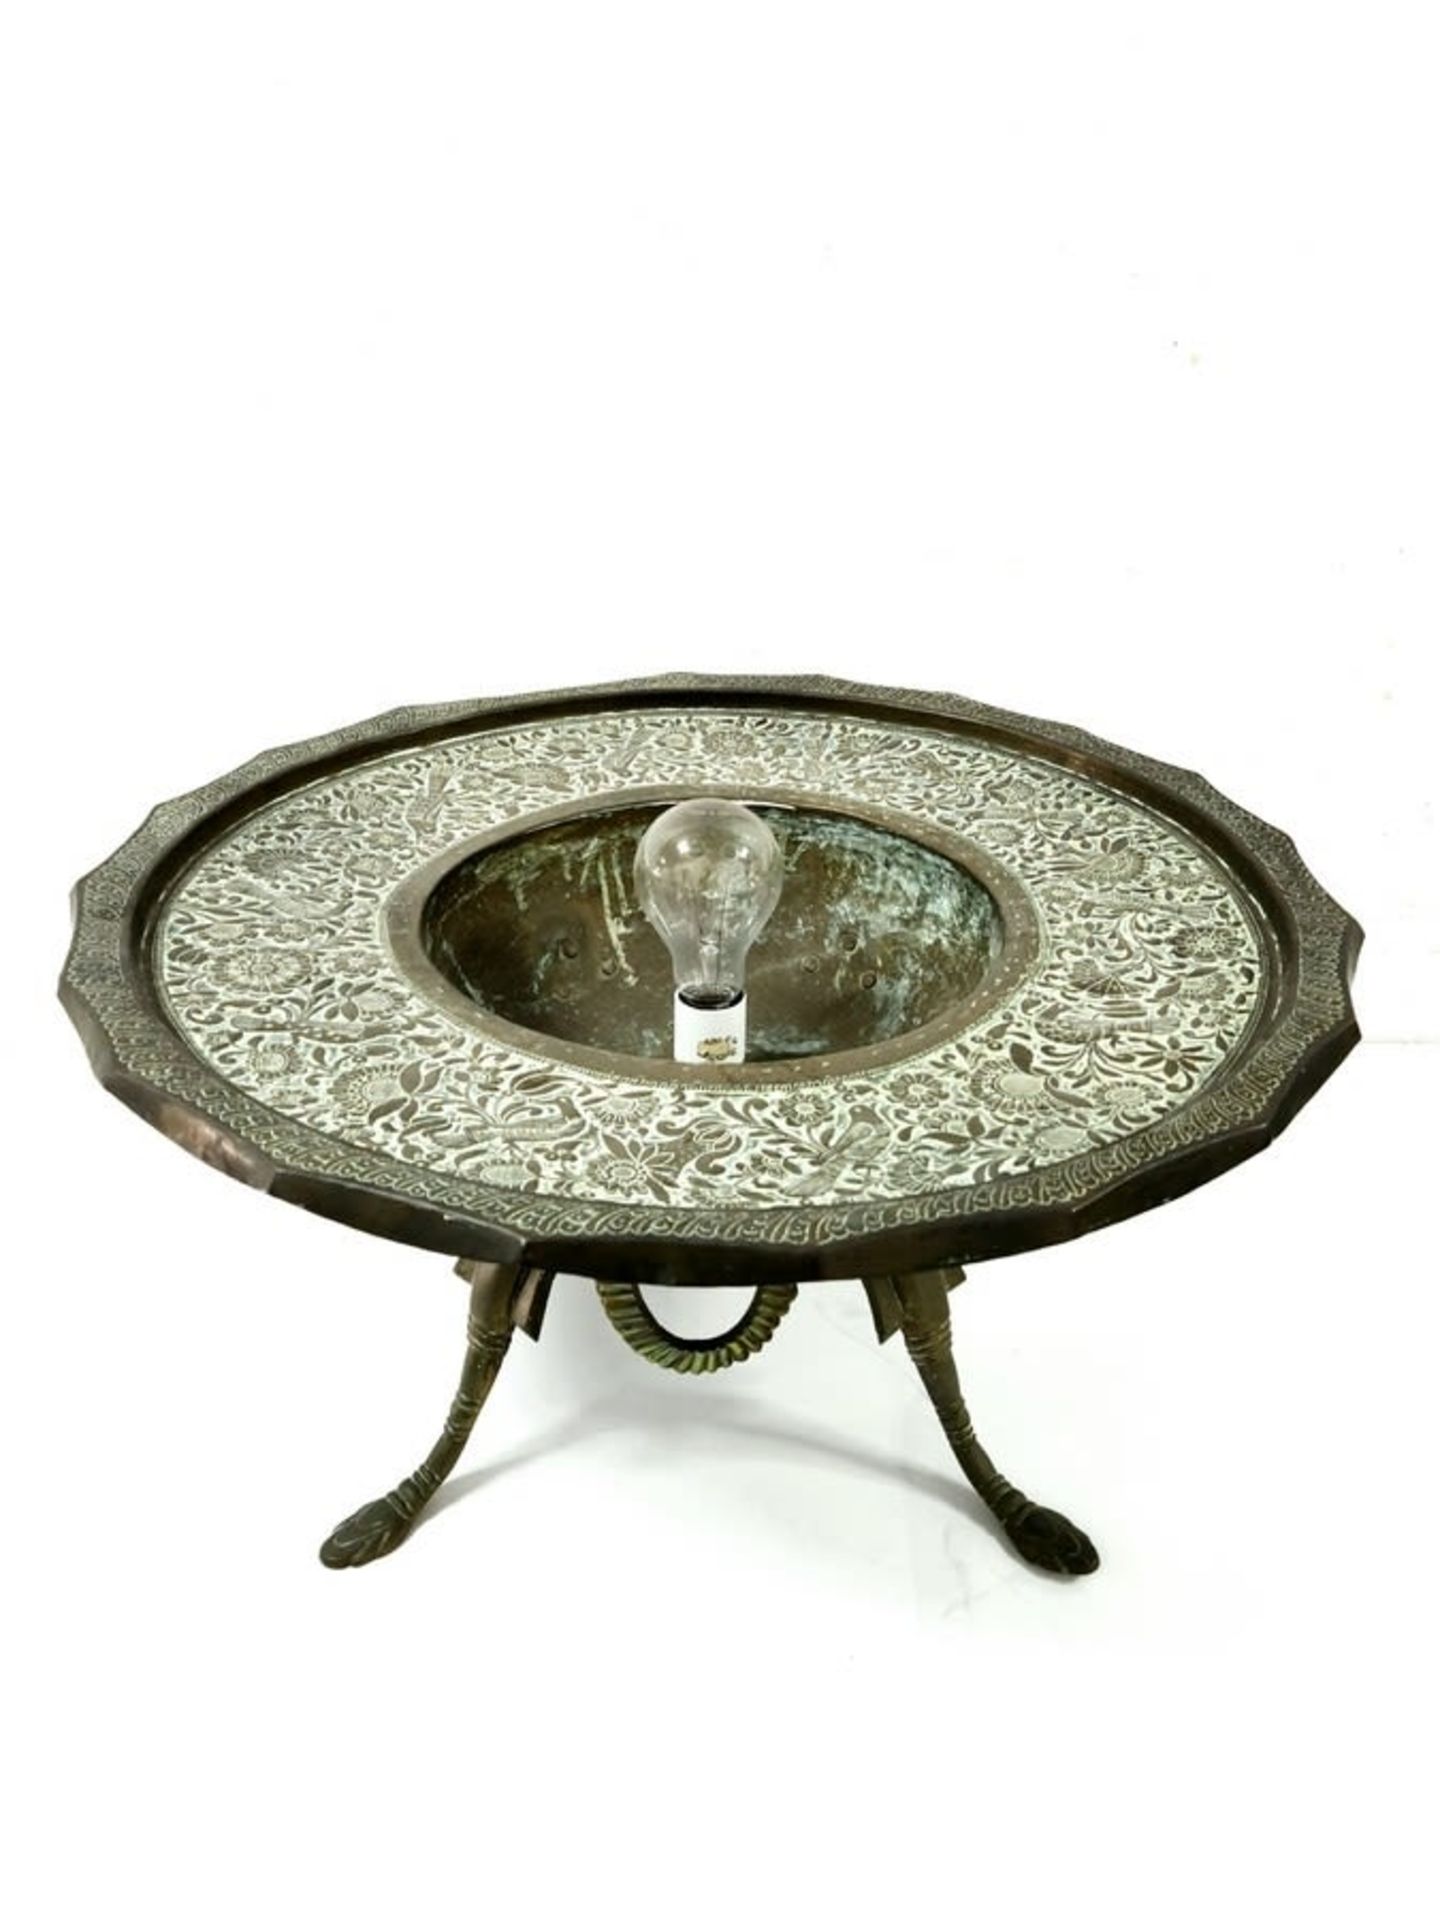 Impressive and high-quality antique Ottoman Turkish brazier, made of hammered and engraved sawn - Image 4 of 8